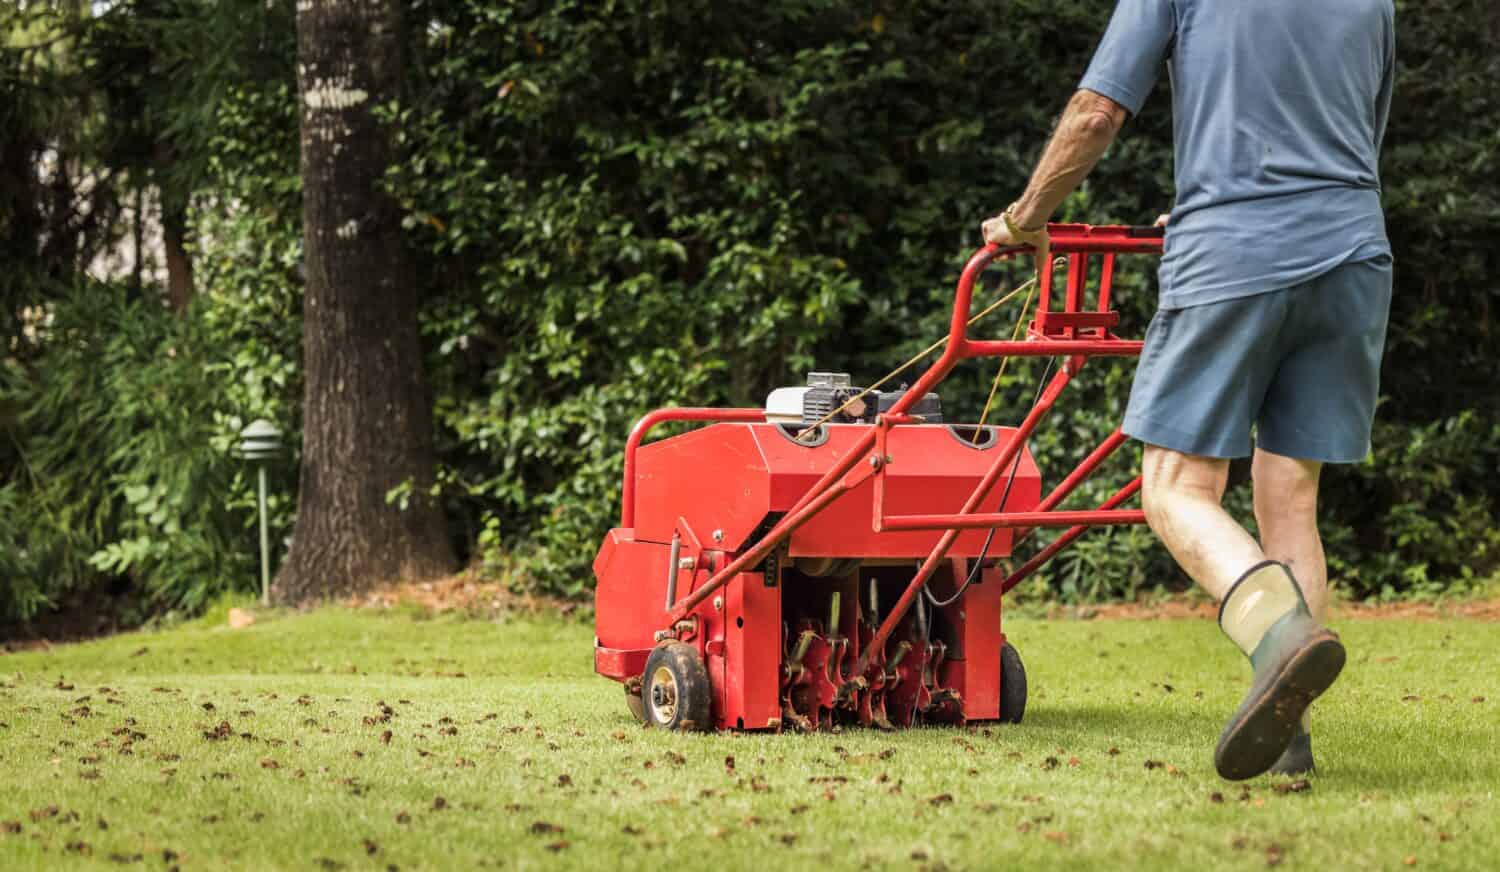 Man using gas powered aerating machine to aerate residential grass yard. Groundskeeper using lawn aeration equipment for turf maintenance.